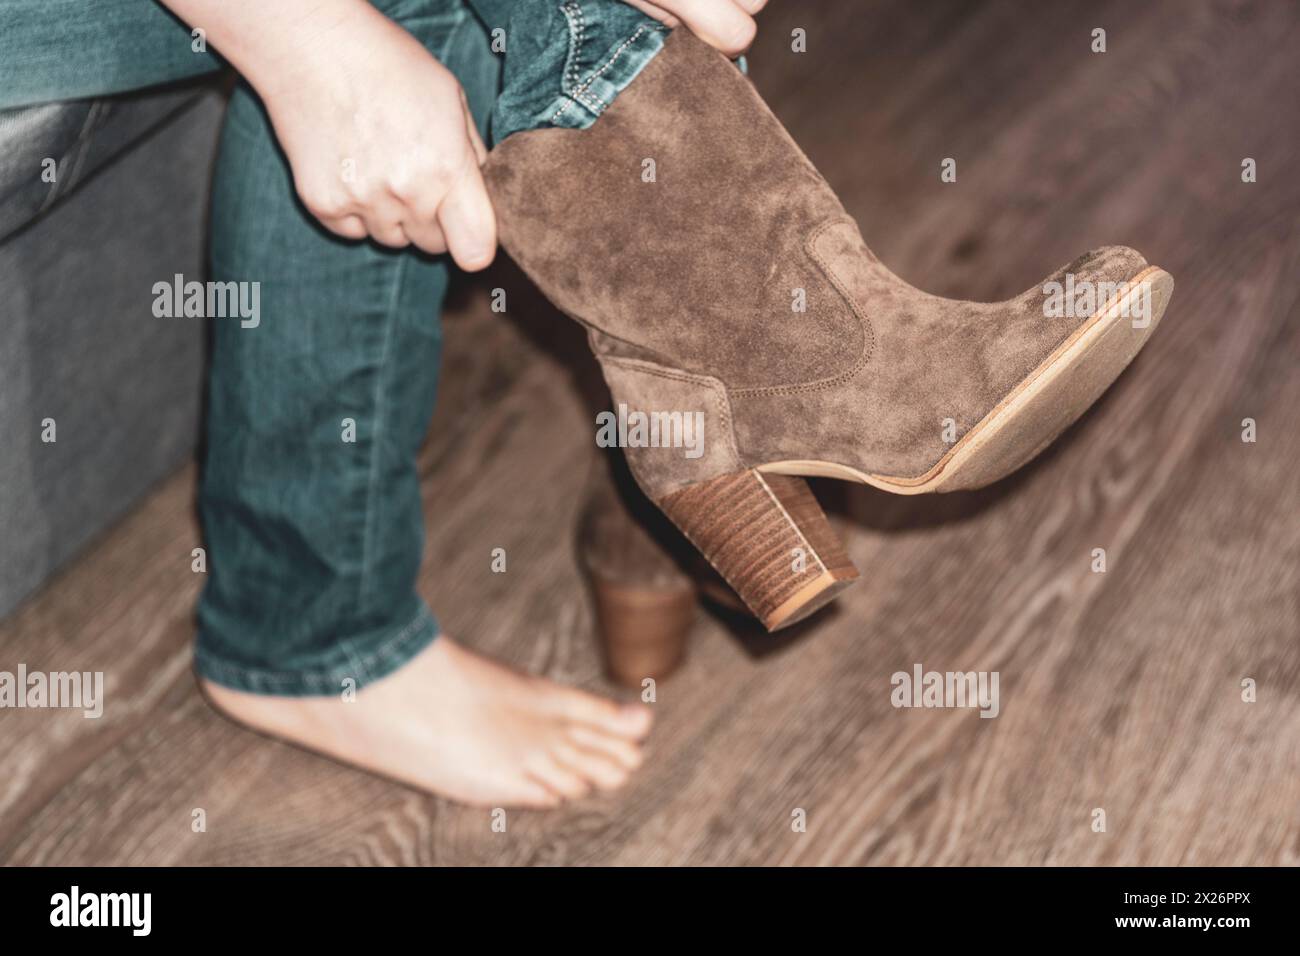 close-up. Shoe fitting. Female hands put on a boot on a leg. The girl puts on footwear. Concept of buying, trying on shoes and boots. Stock Photo